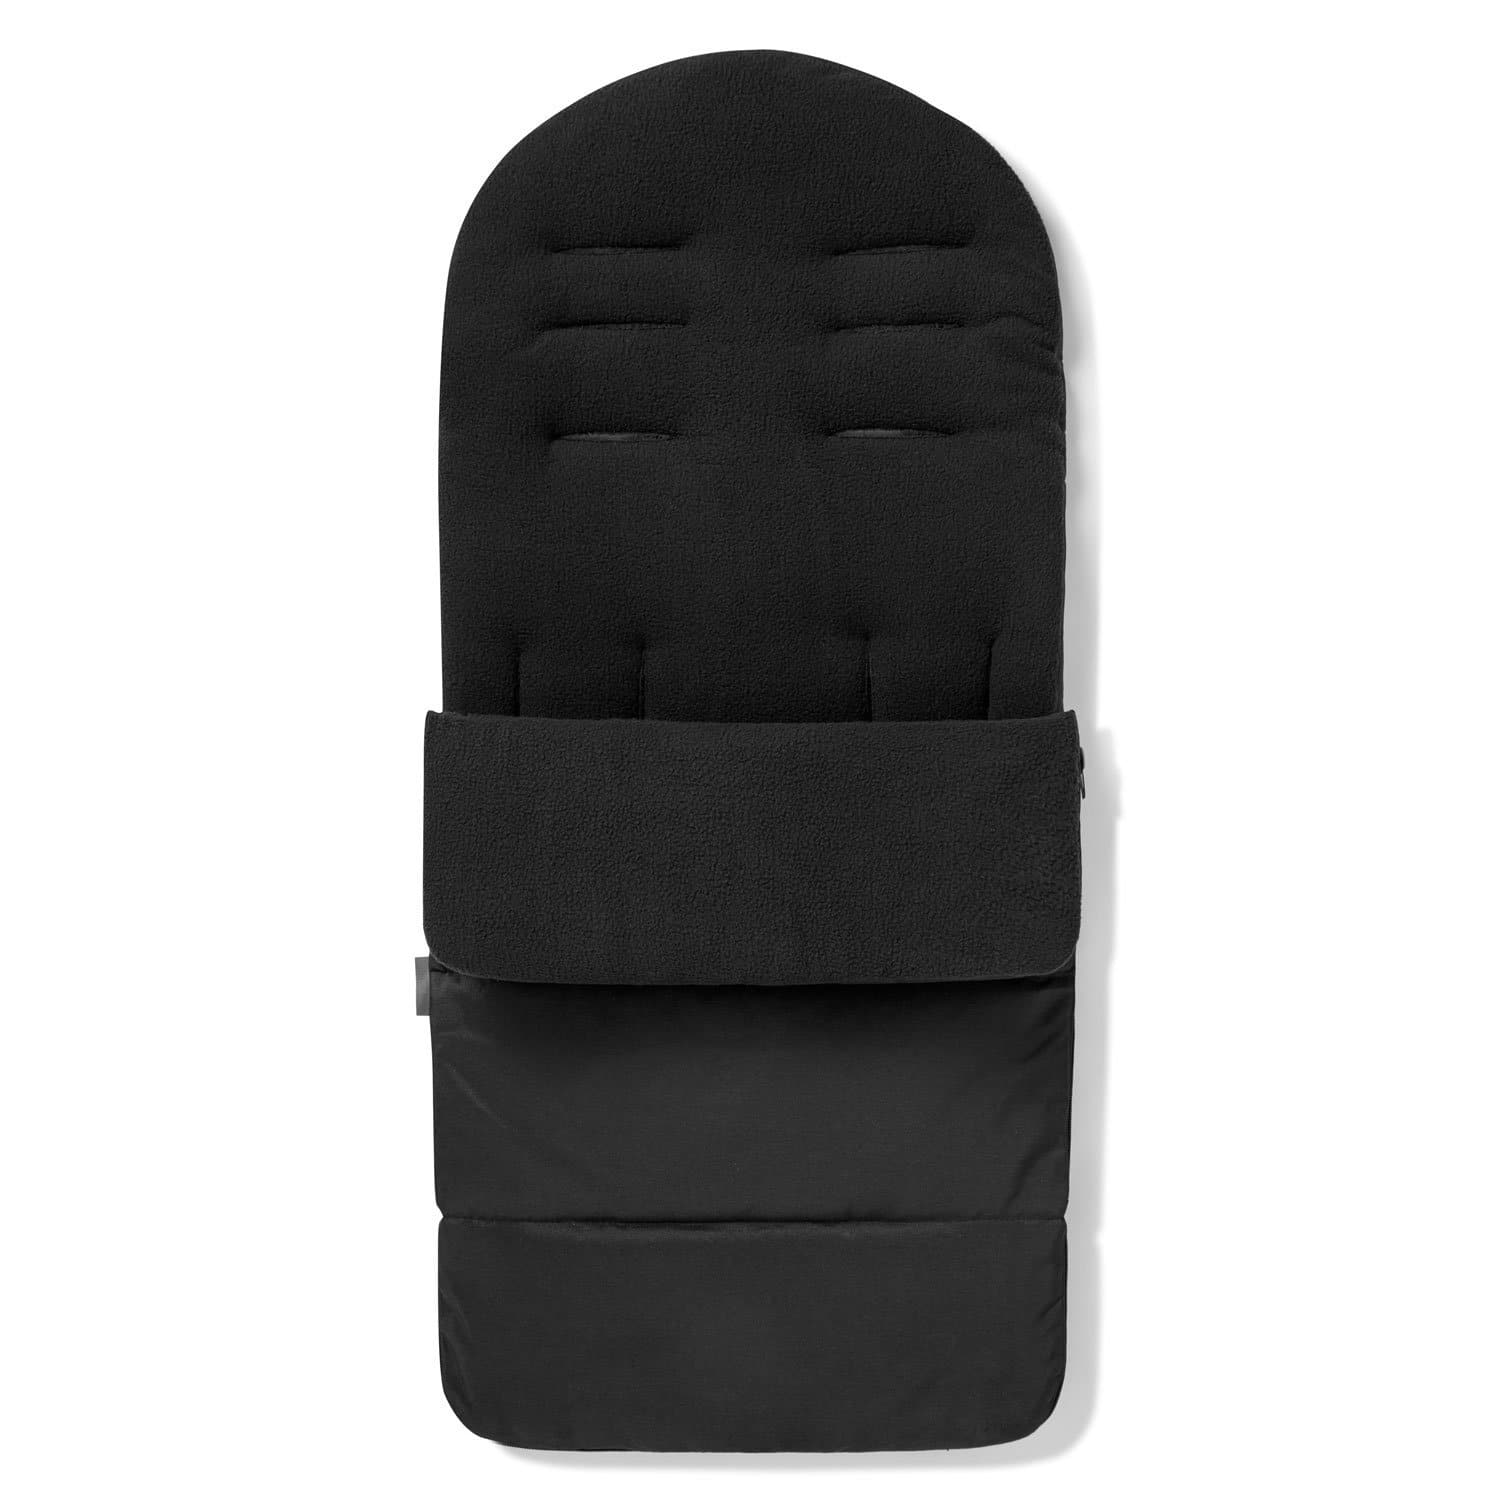 Premium Footmuff / Cosy Toes Compatible with Venicci - Black Jack / Fits All Models | For Your Little One